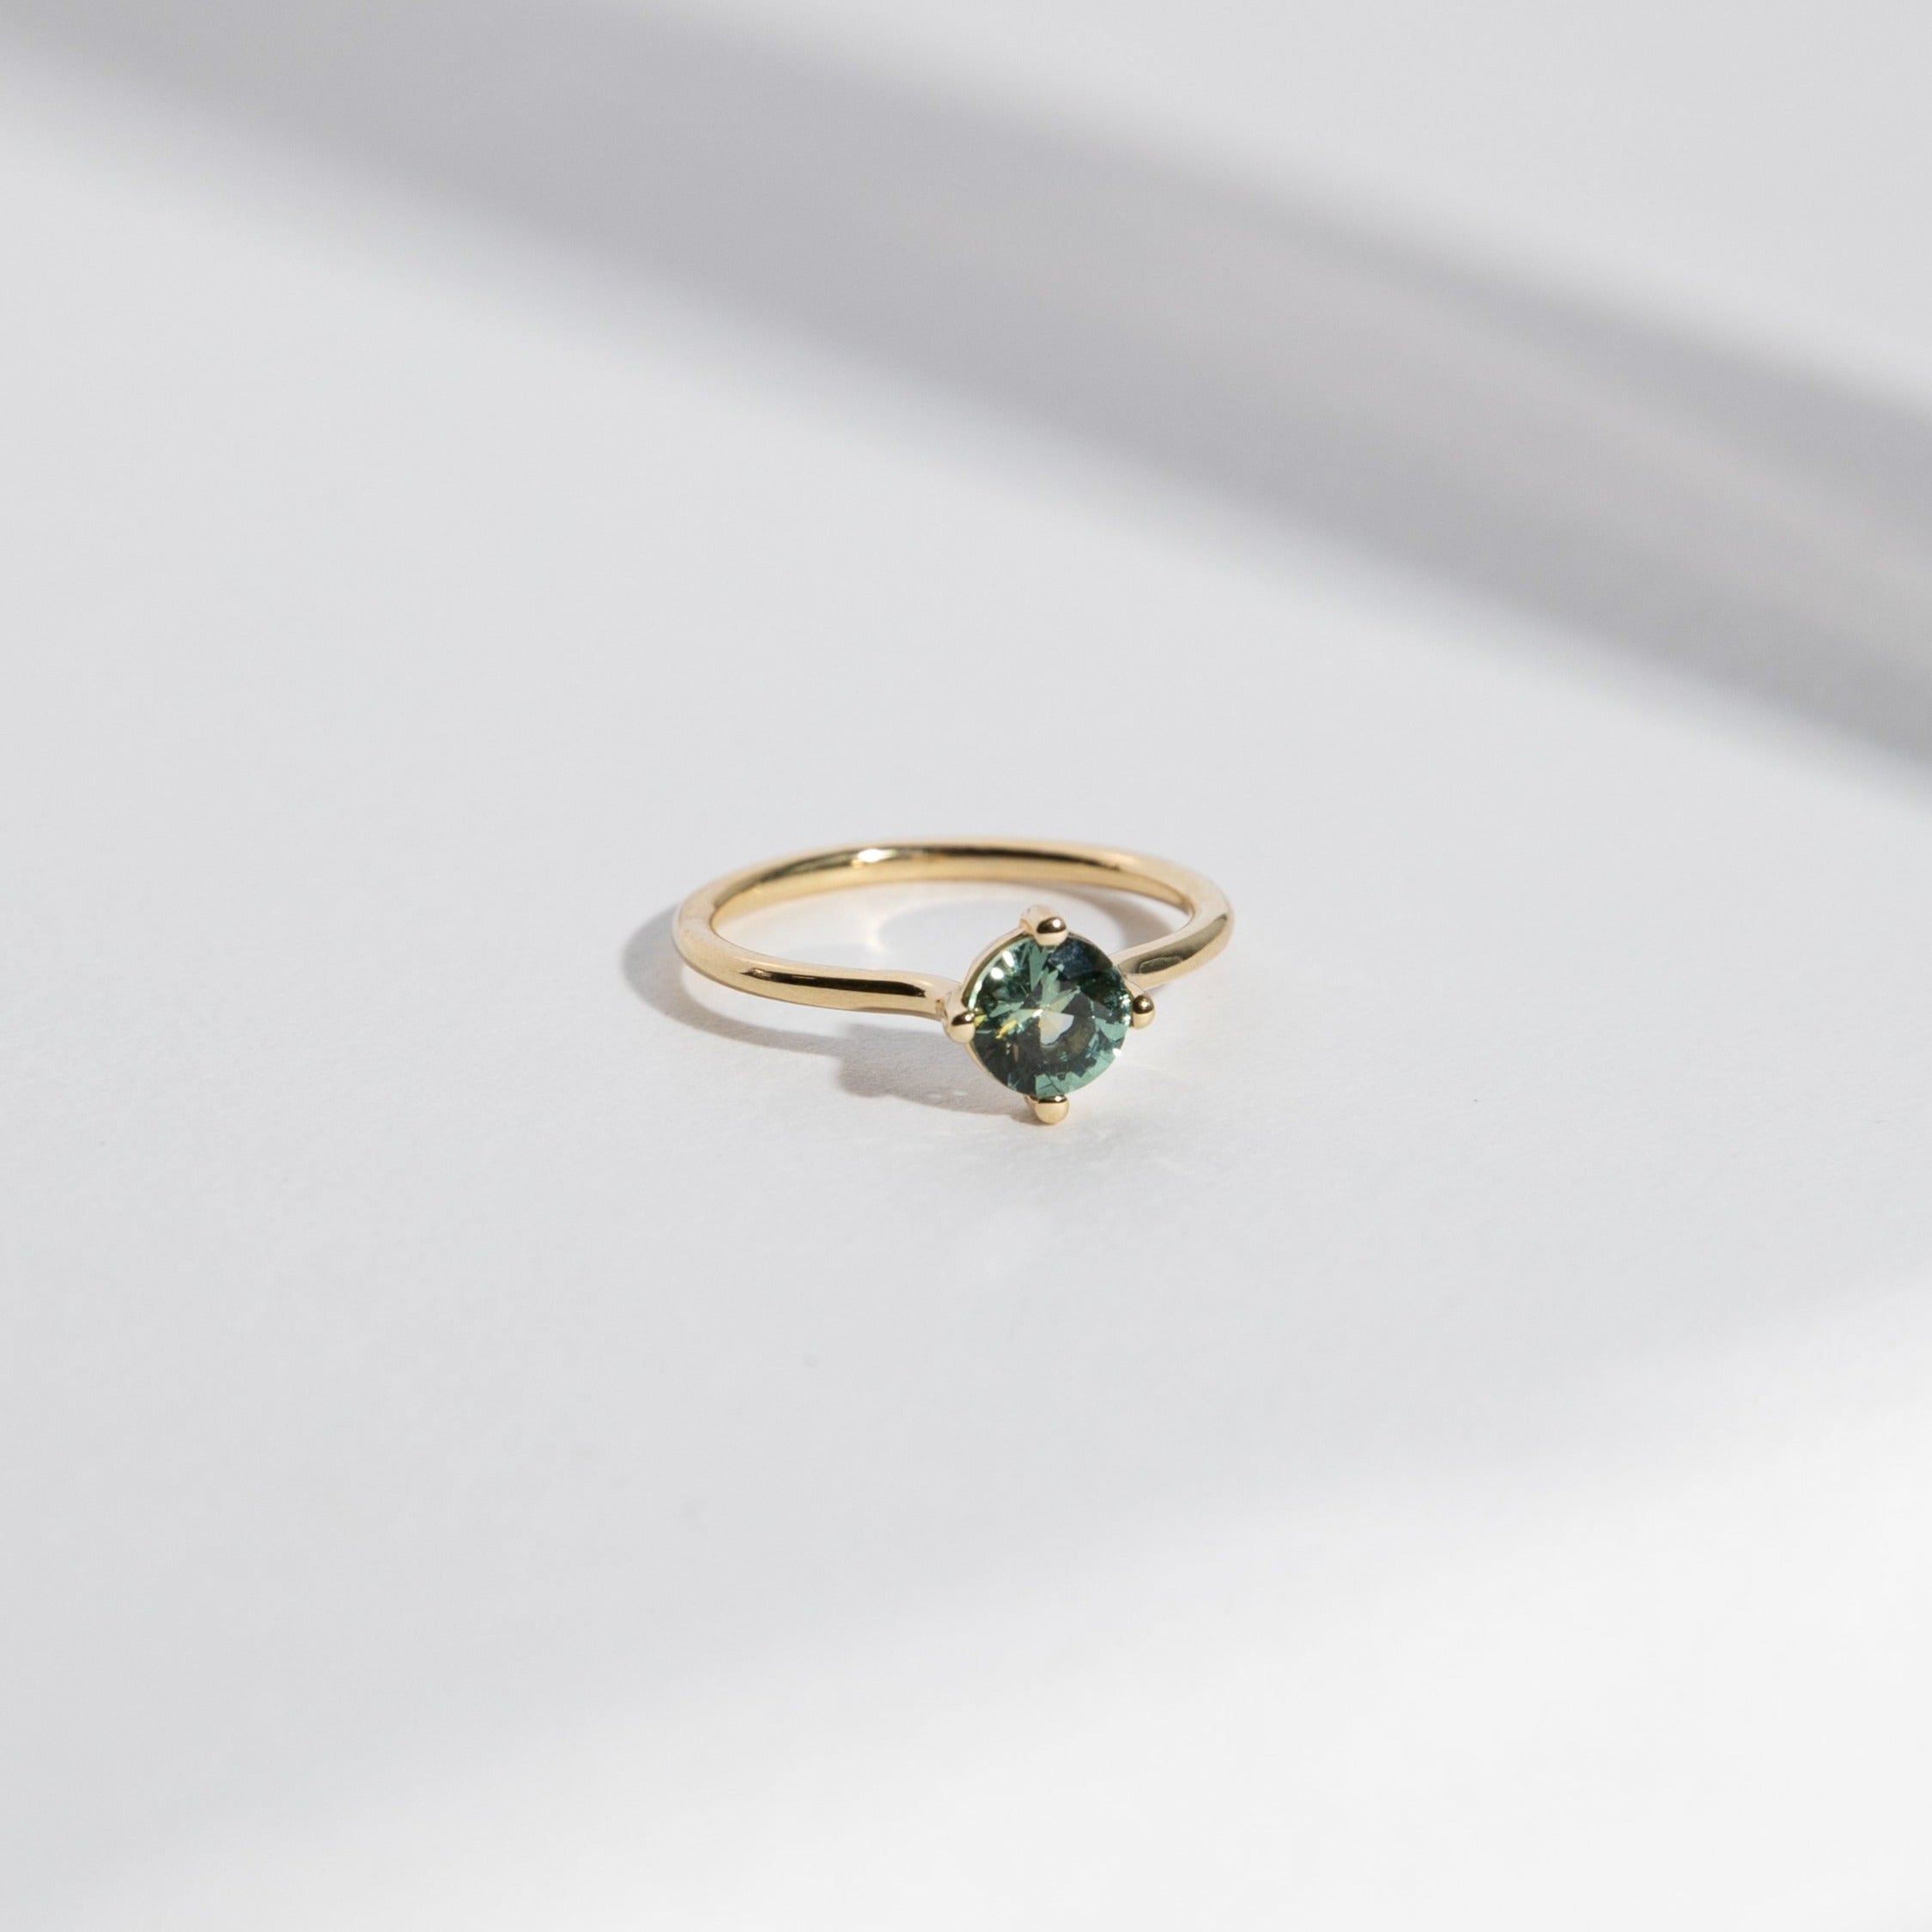 Velu Handmade Ring in 14k Gold set with a 0.8ct round brilliant cut green sapphire By SHW Fine Jewelry NYC